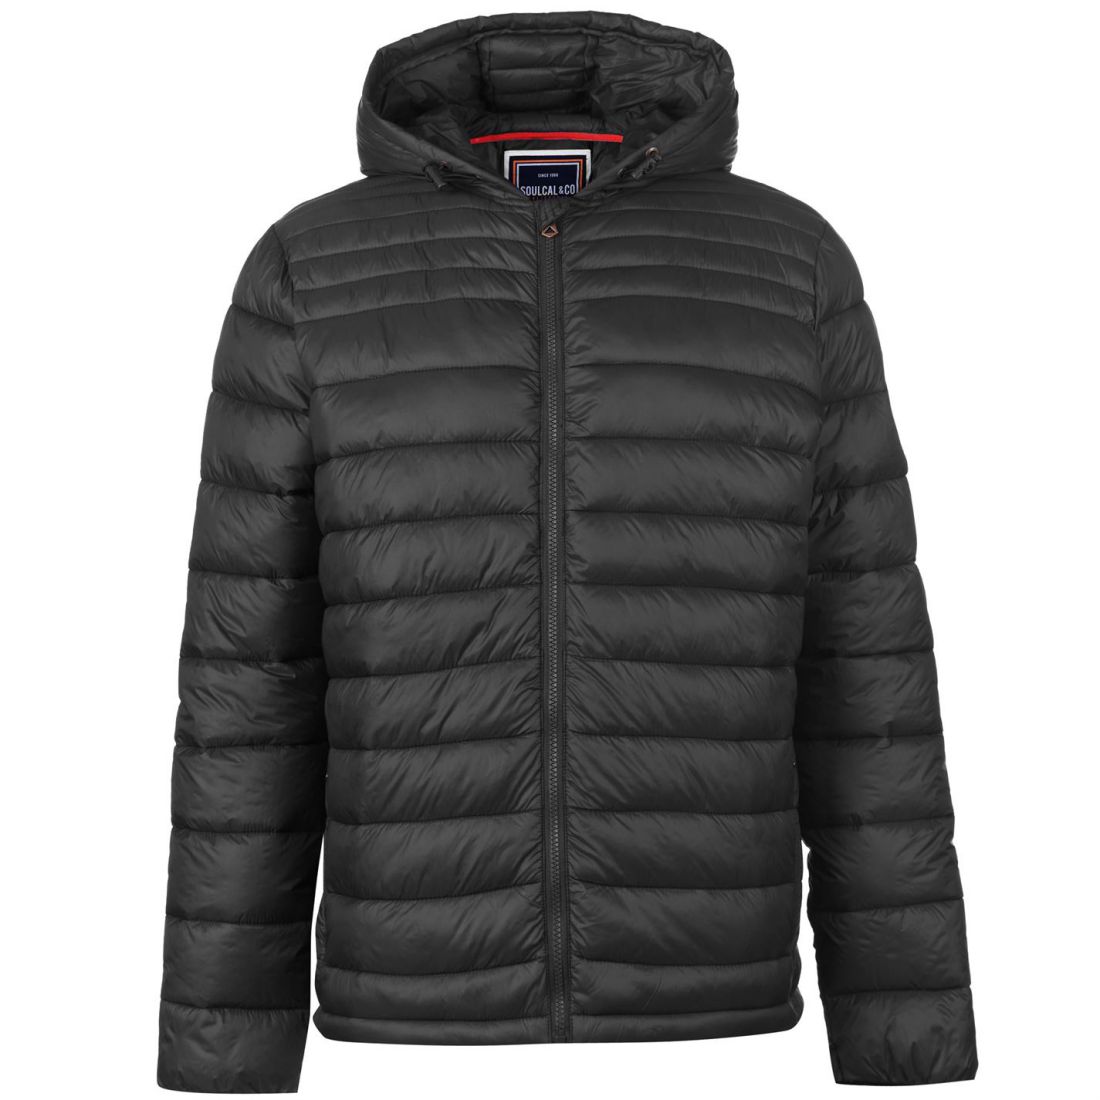 mens bubble jacket with hood